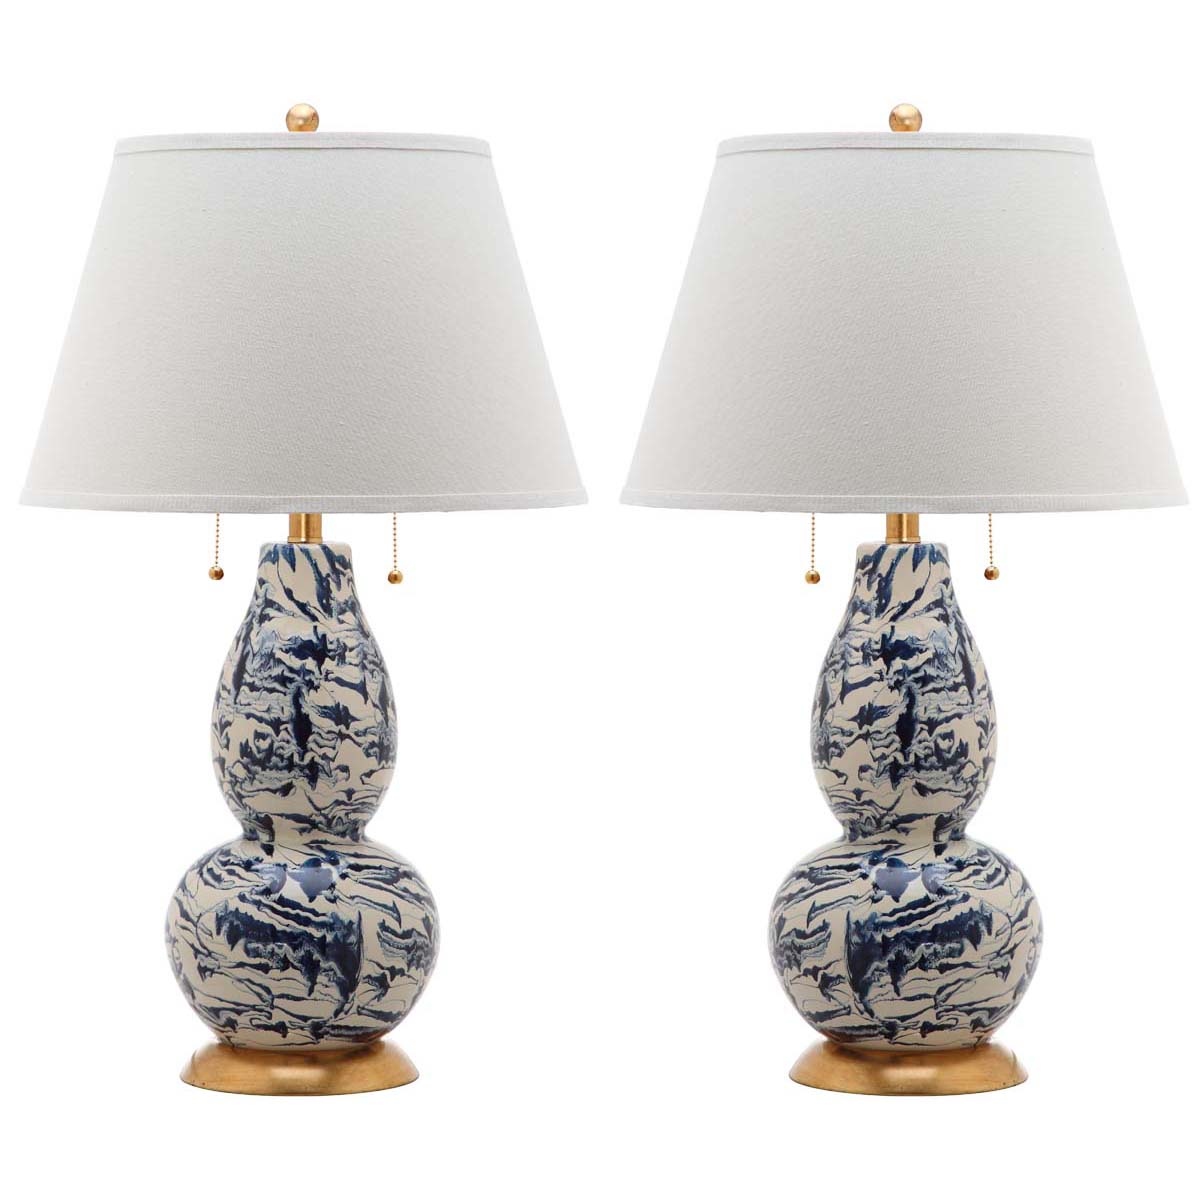 Safavieh Color Swirls 28 Inch H Glass Table Lamp, LIT4159 - Navy/White (Set of 2)